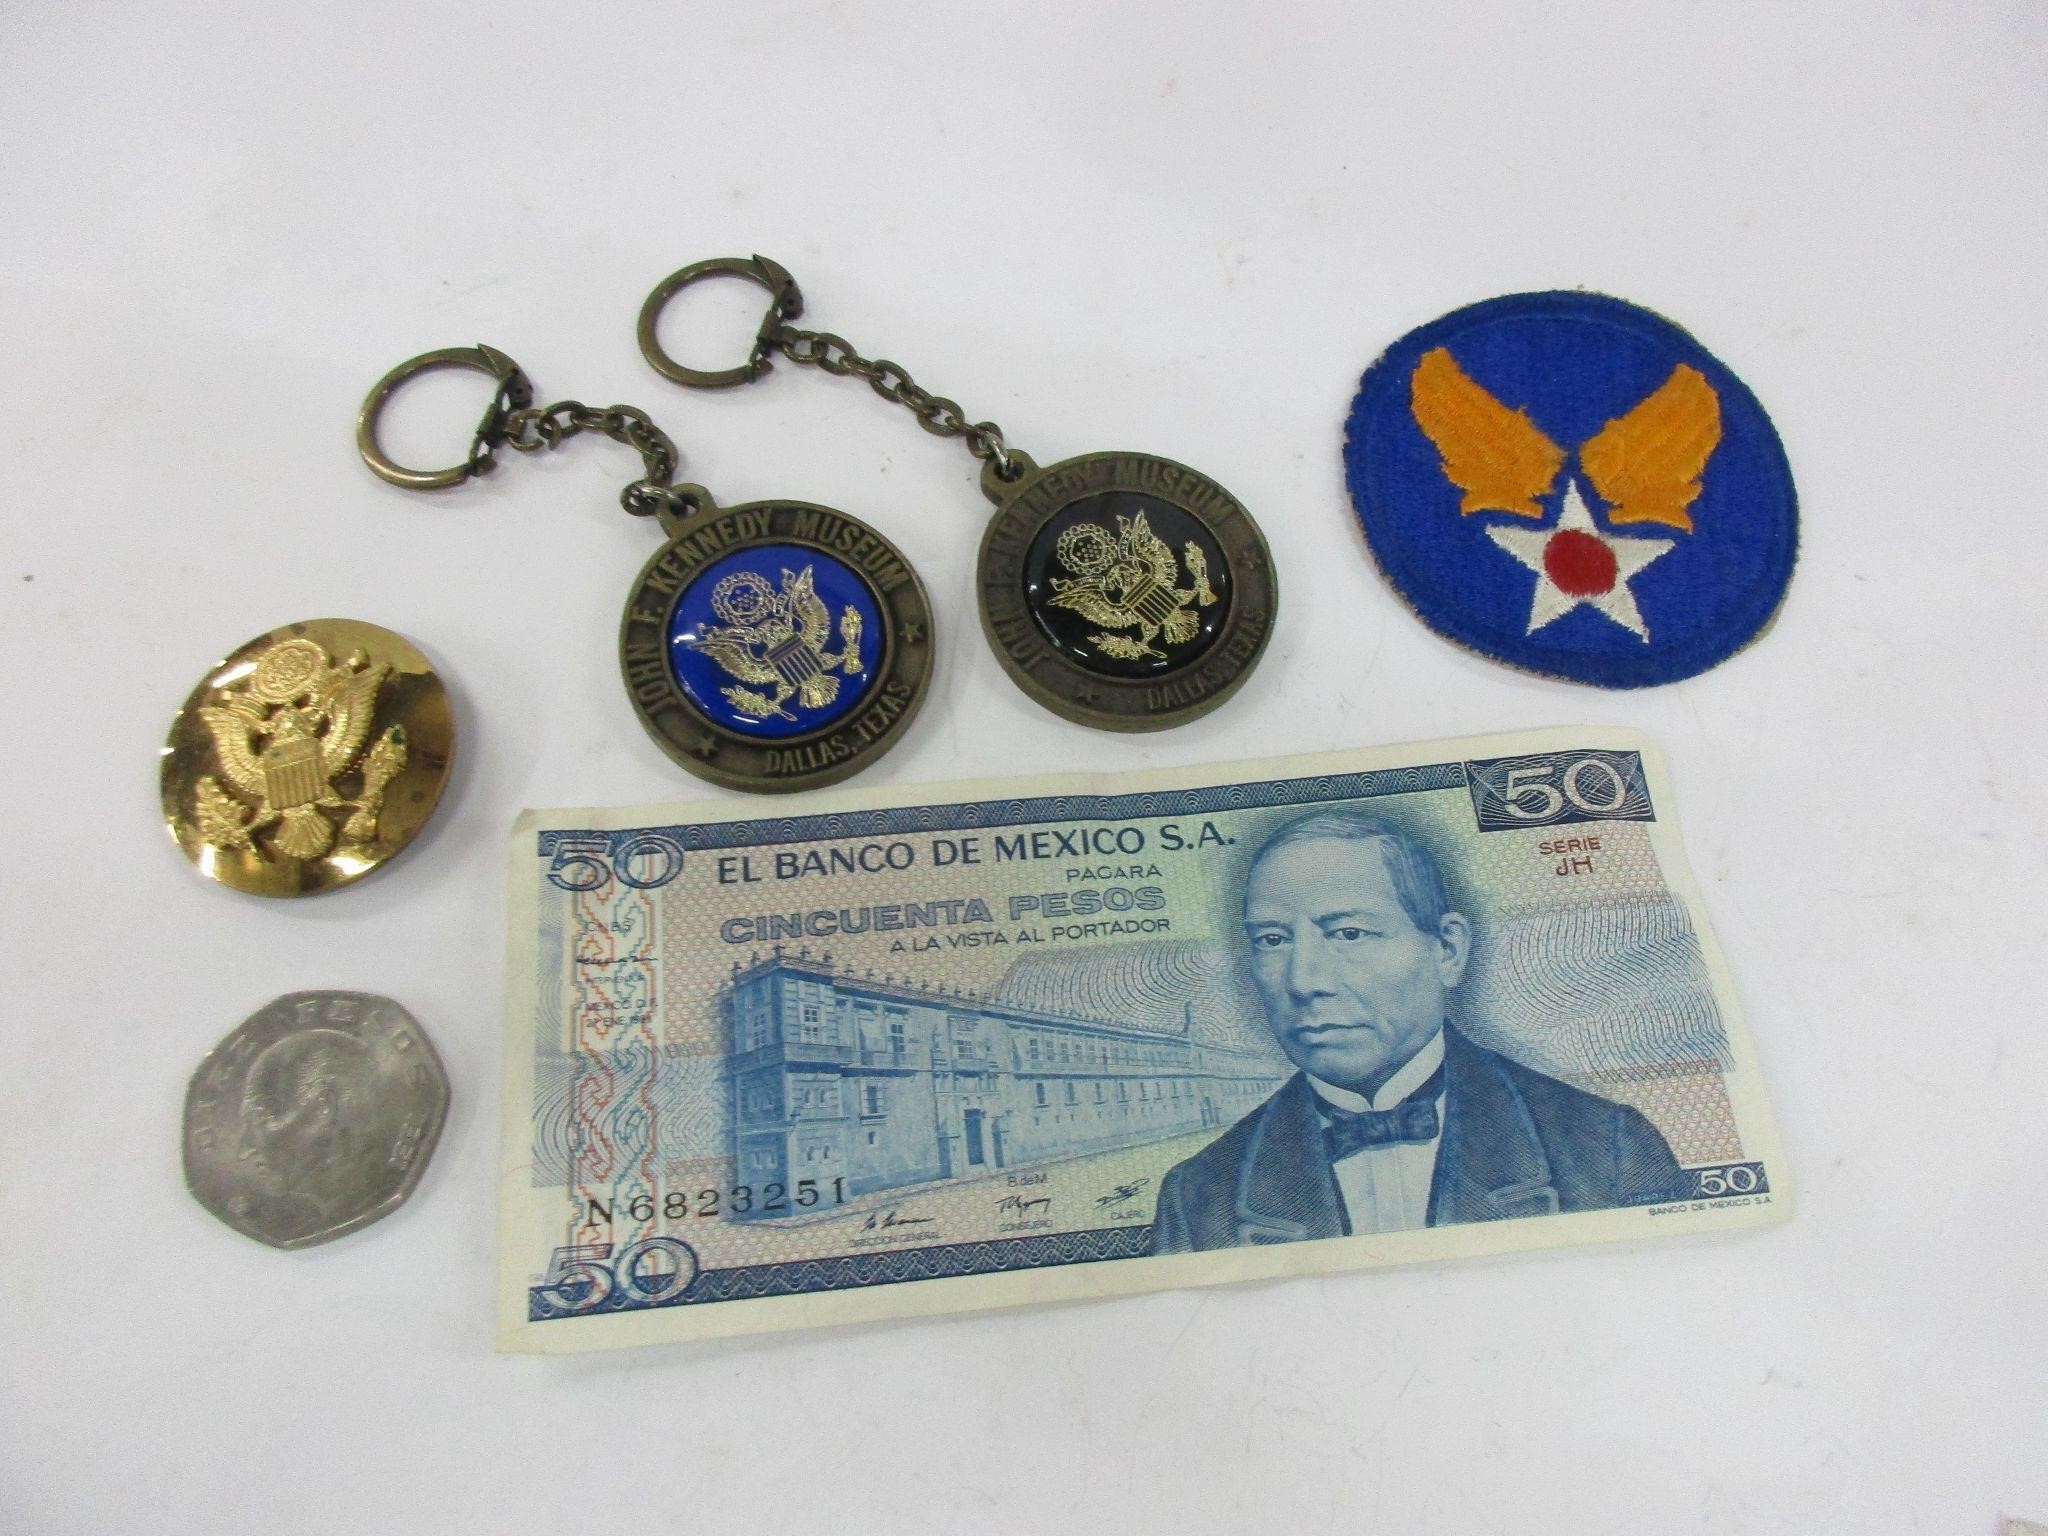 Foreign currency, keychains, military items